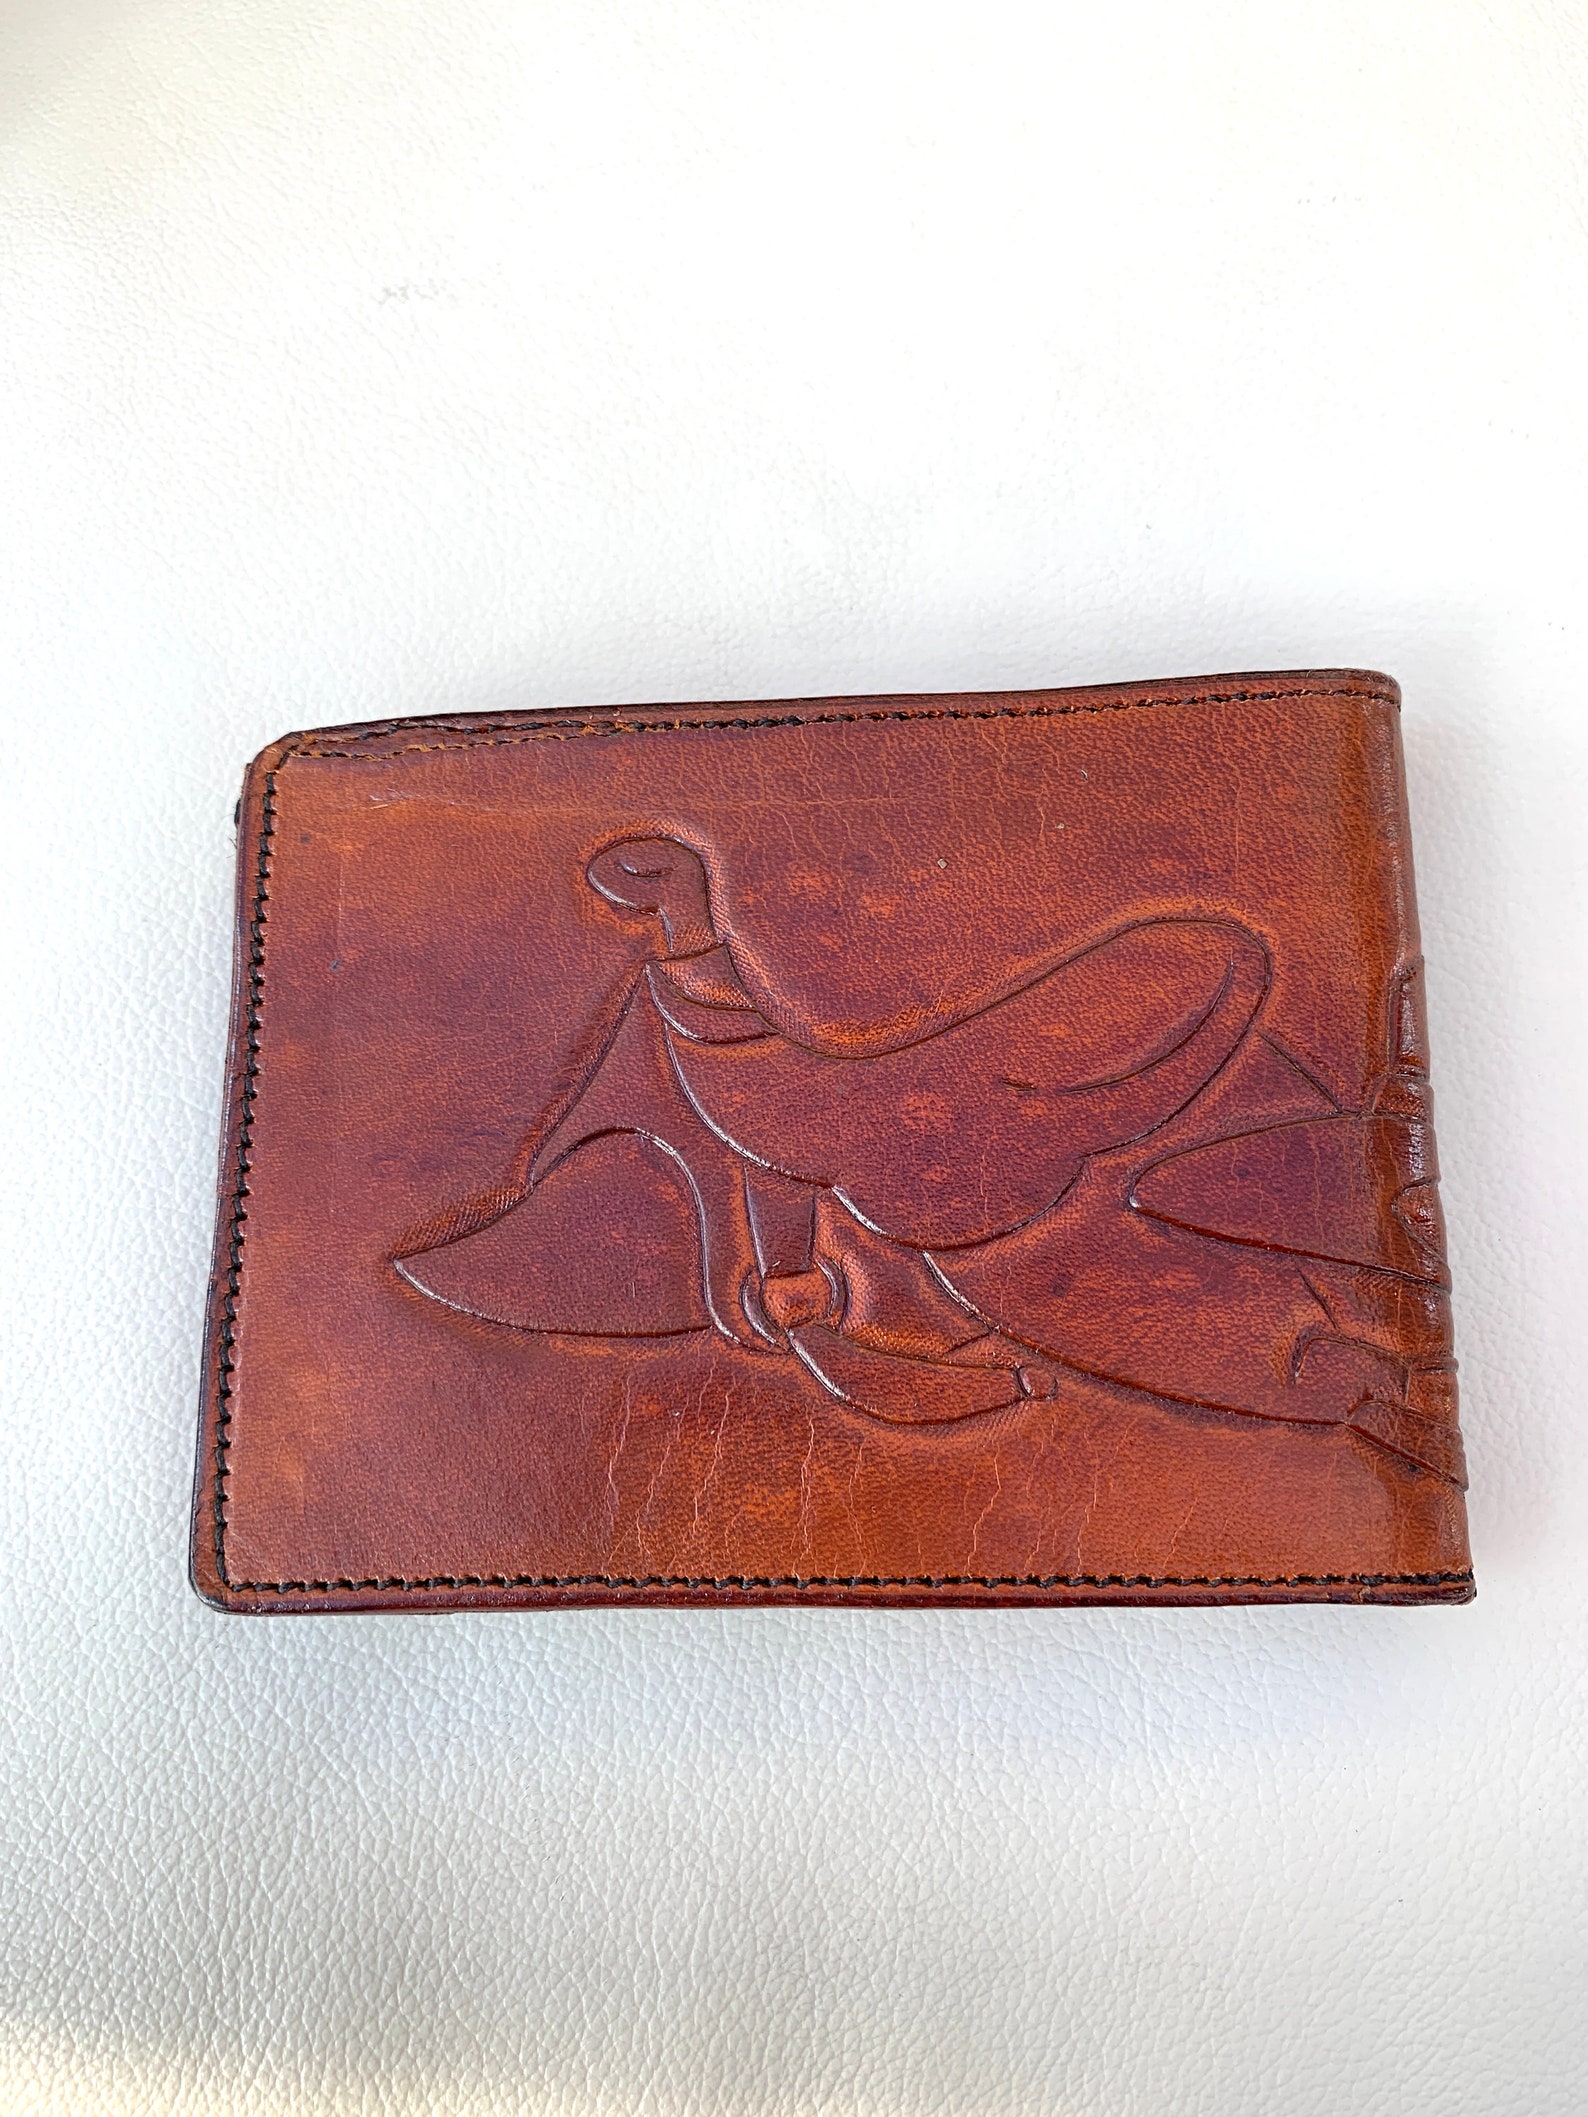 Amish Made Leather Wallet With Boot Hat and Saddle - Etsy